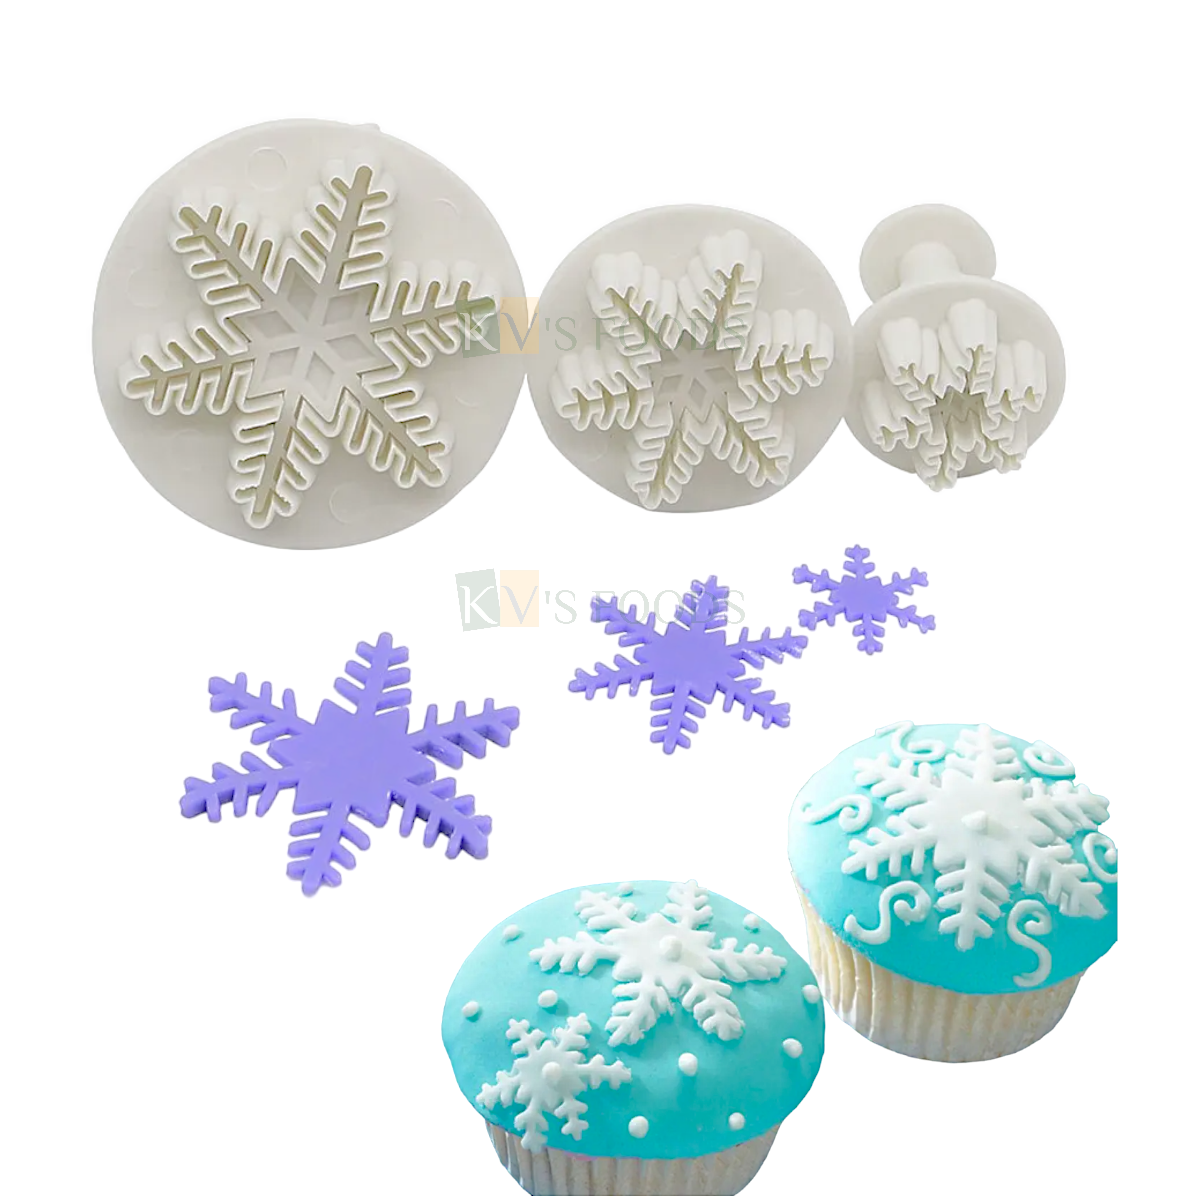 3 PCS White Christmas Snowflakes Fondant Plunger Cutters Stamps, Molds, Embossing Spring Mold Printed Presses Impression, Chocolates Pancake Cookies Christmas Tree, Birthday Wedding Cupcake Decoration